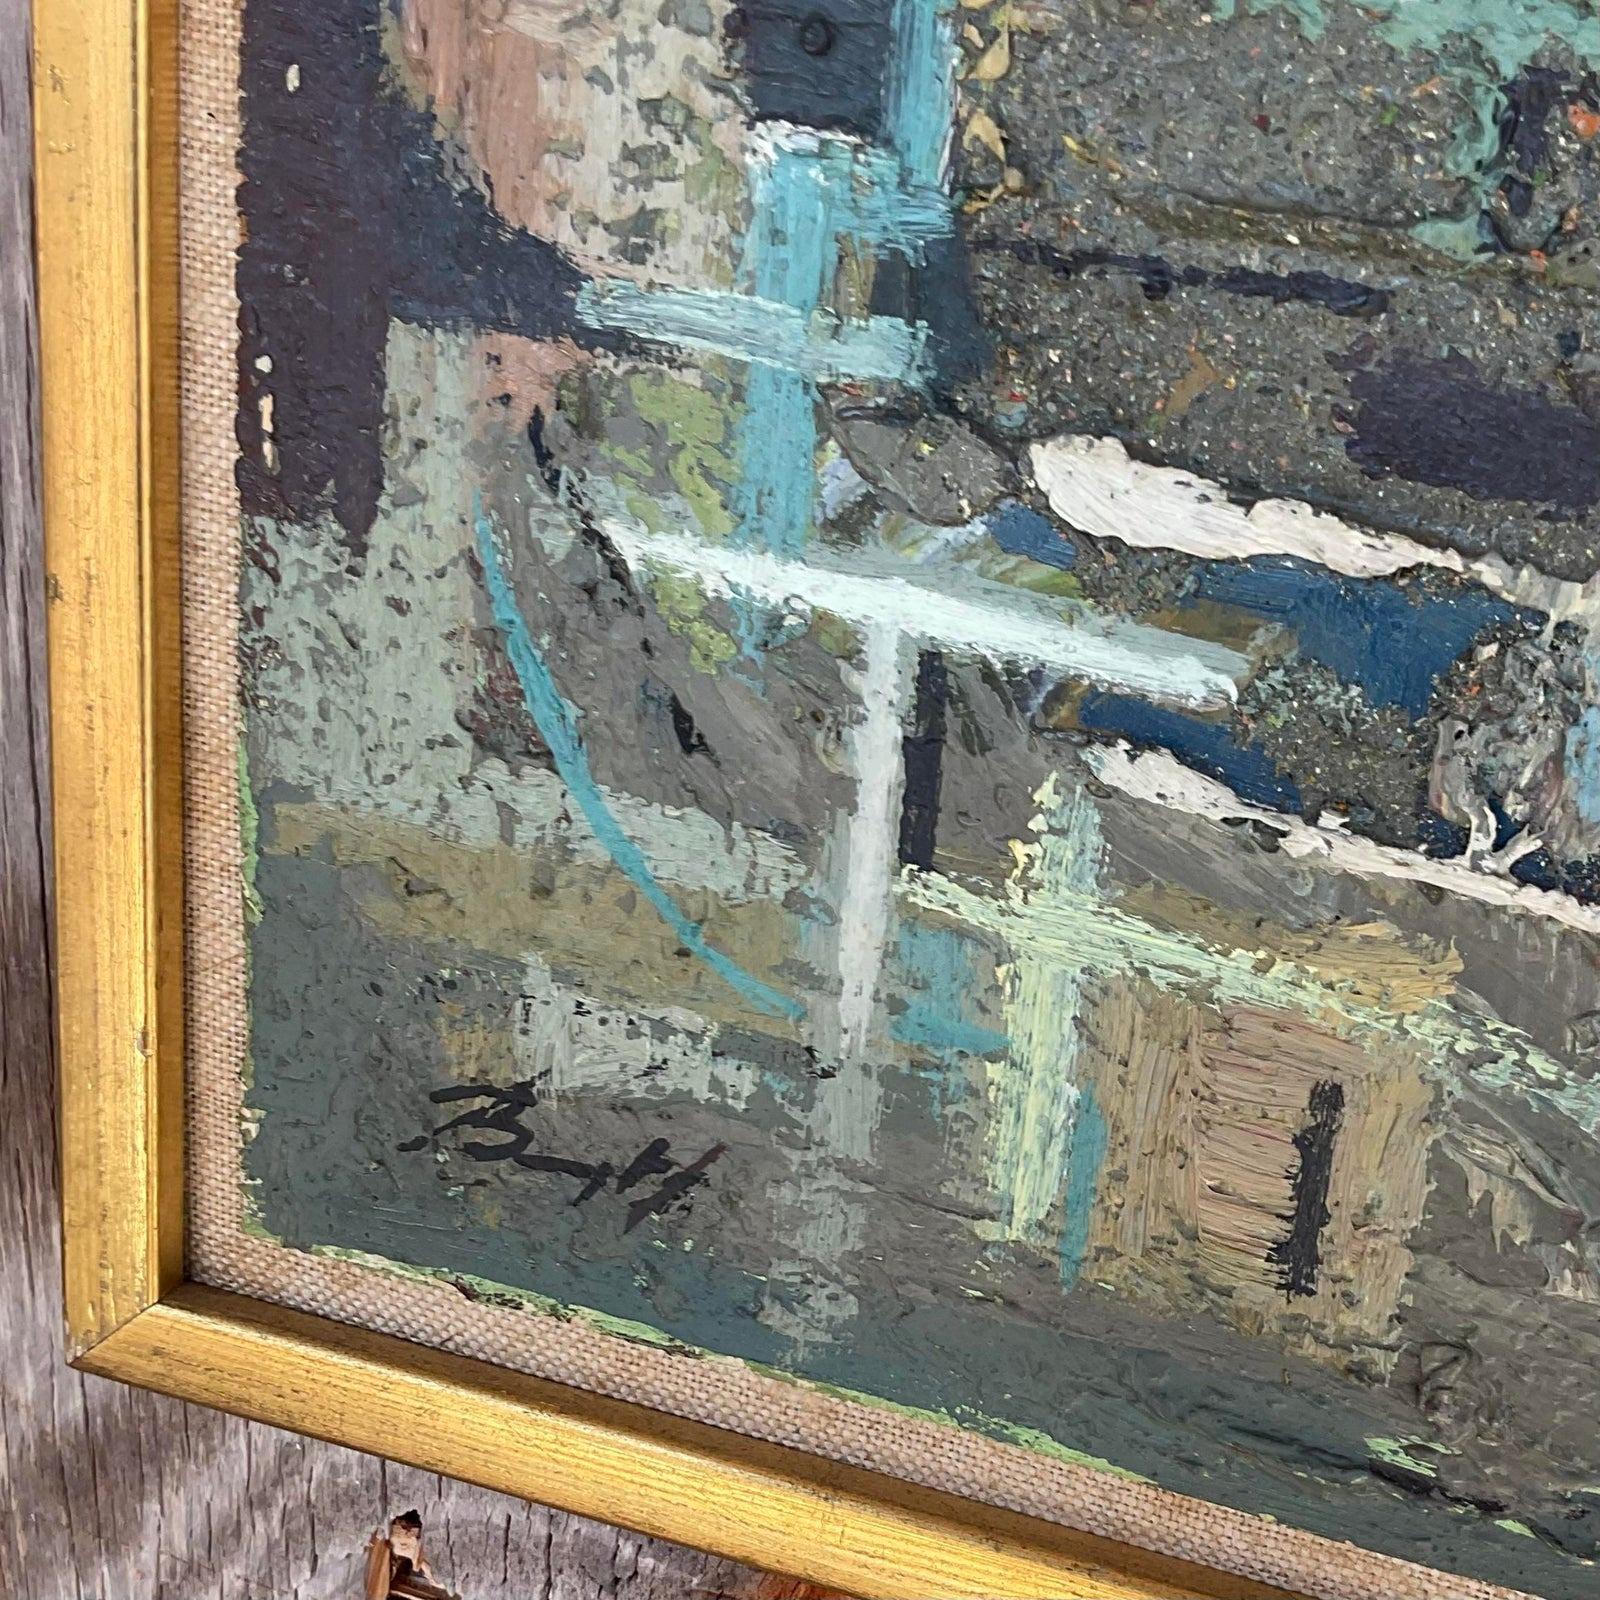 An incredible vintage Boho original oil painting on board. A chic Abstract composition in chic muted blues. Signed by the artist. Acquired from a Palm Beach estate.